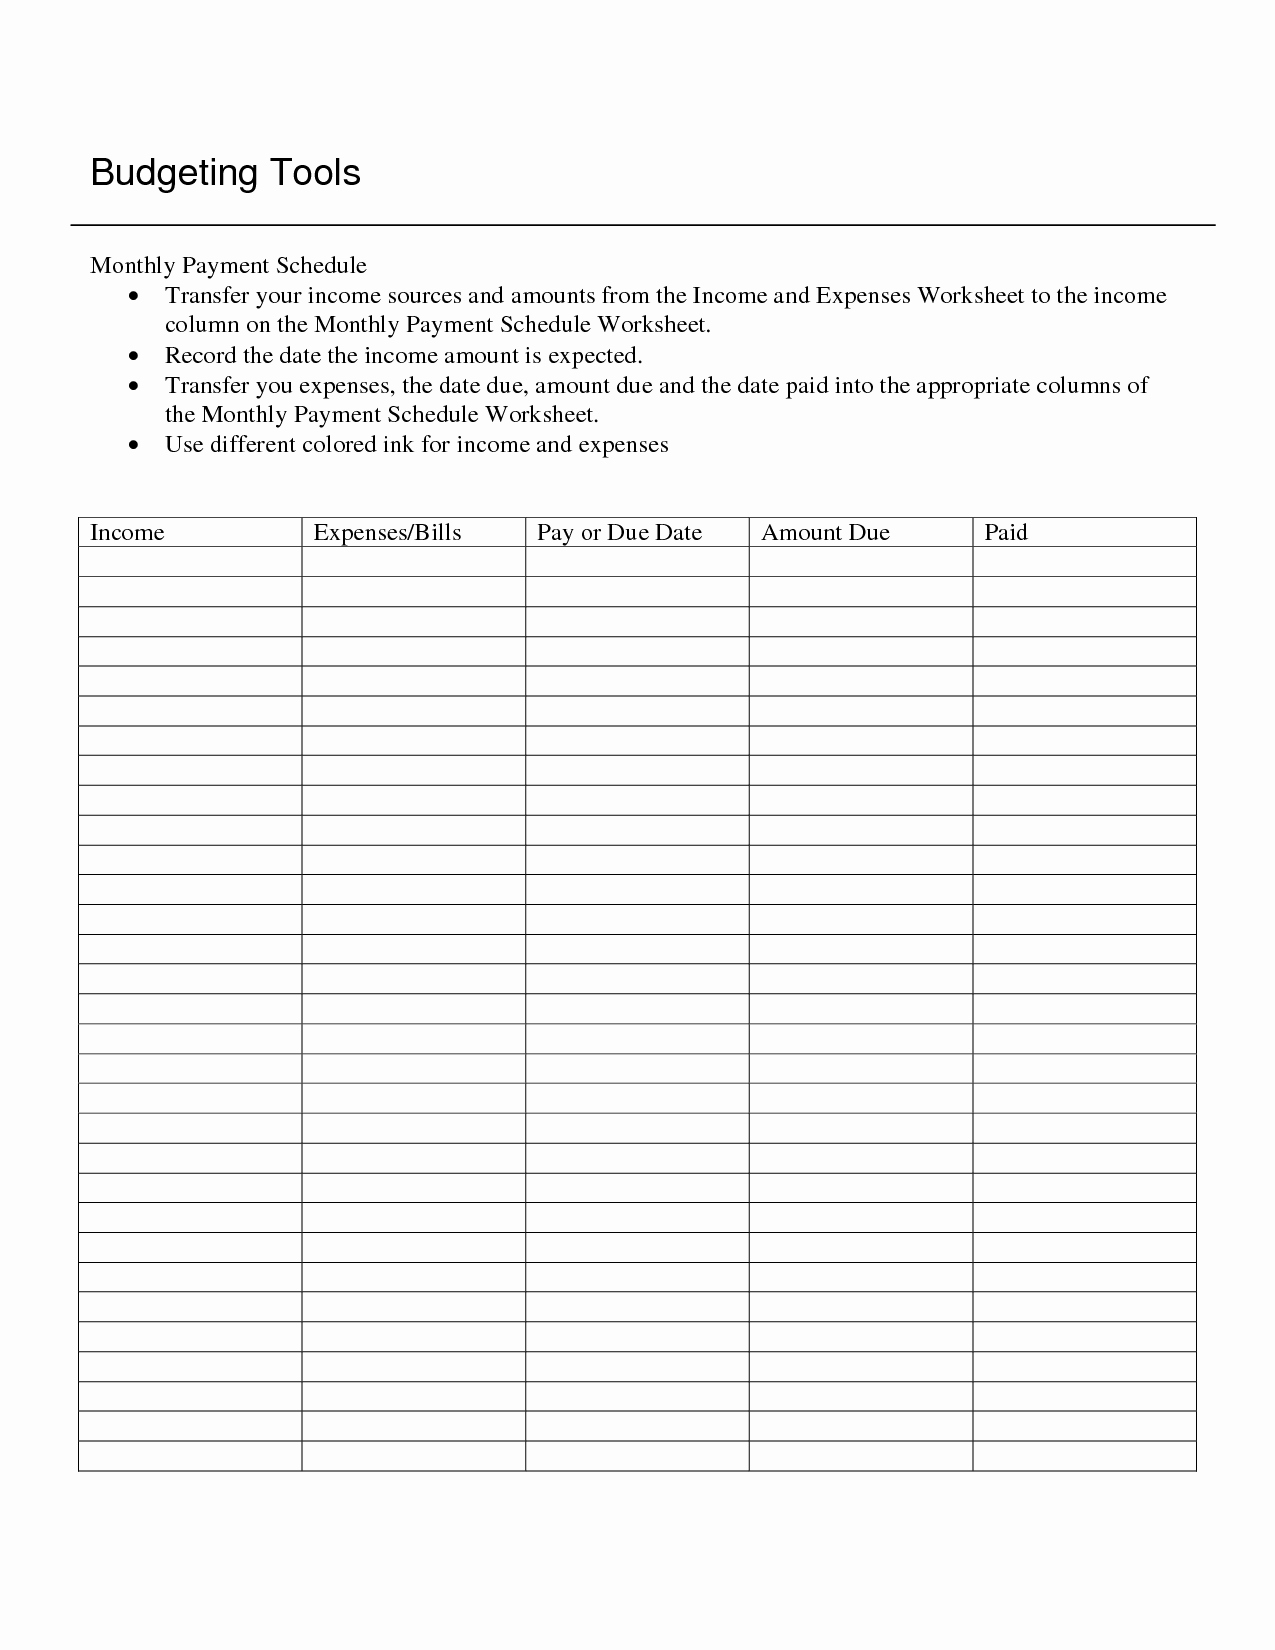 Monthly Income and Expense Worksheet Inspirational 16 Best Of Bud Worksheet Monthly Bill Blank